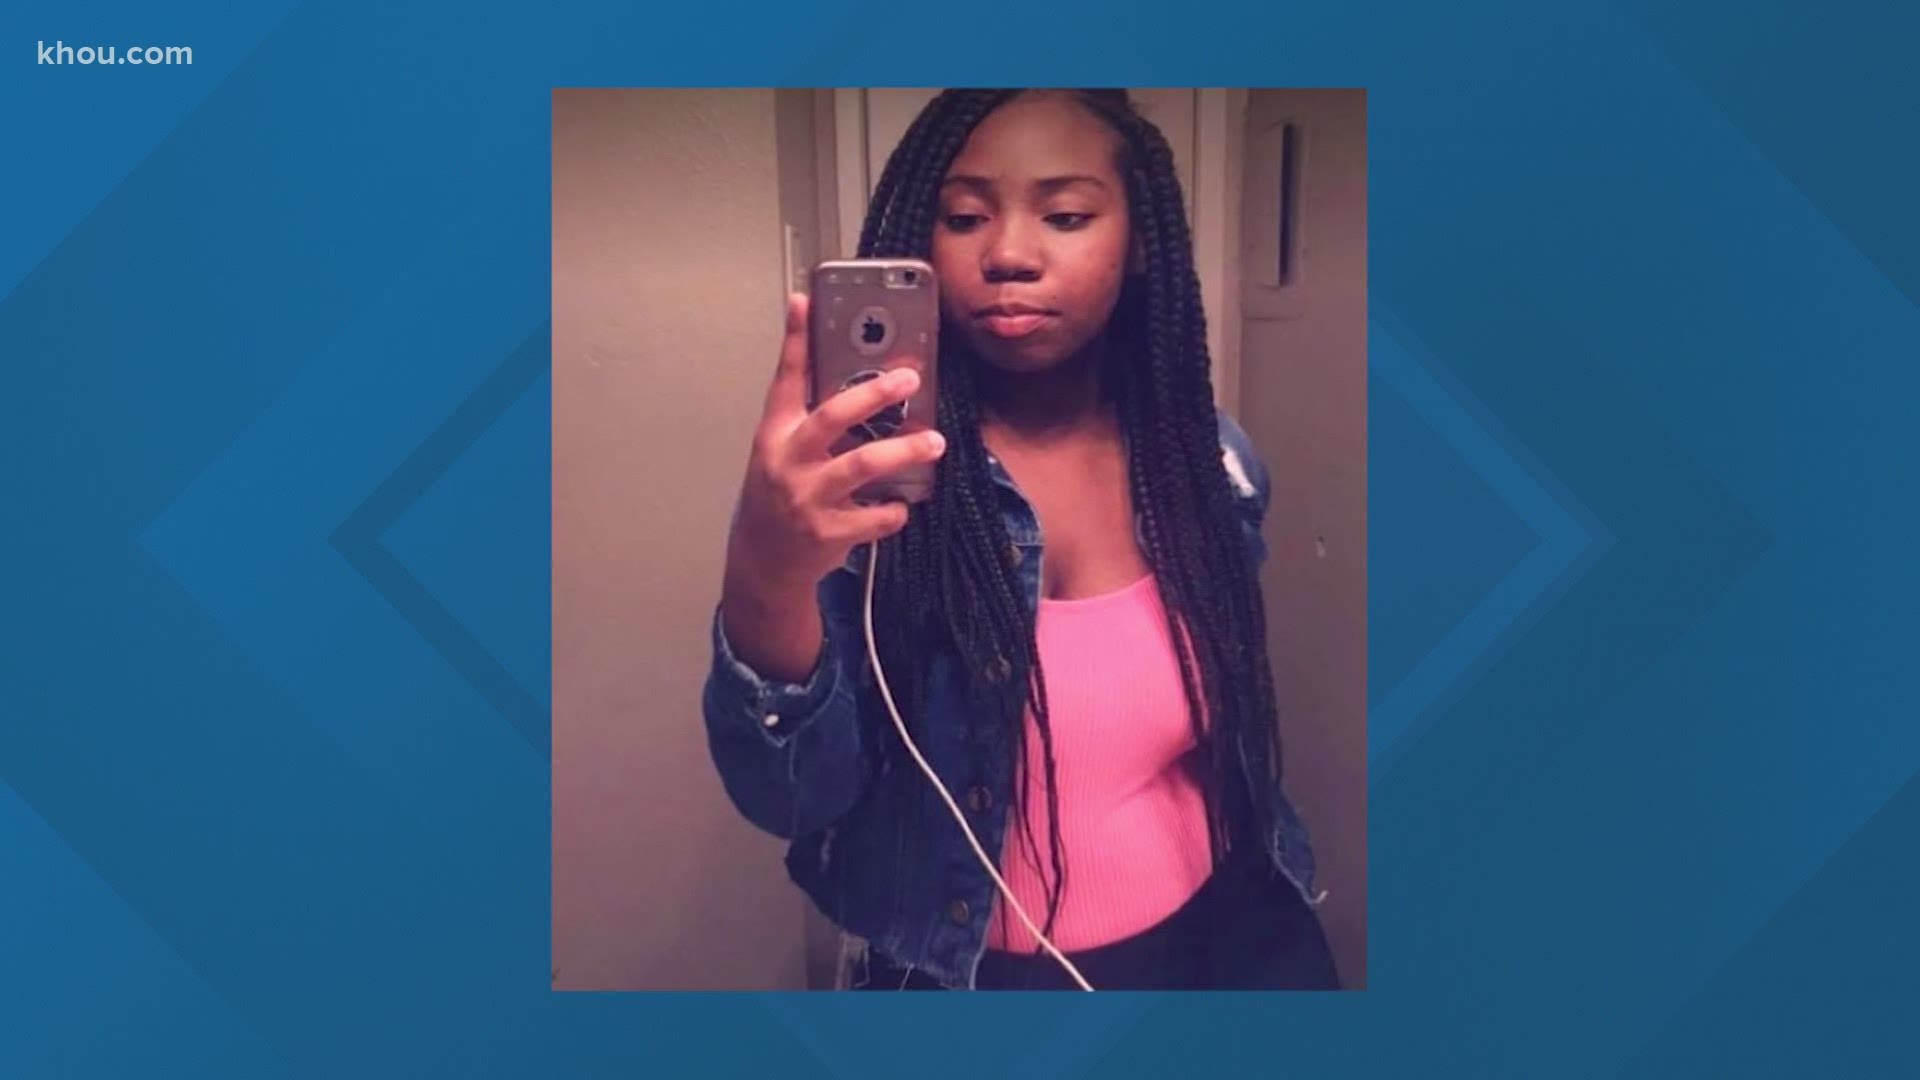 A Houston teen who was shot and killed Monday adored her family, loved to dance and dreamed of going to college to study fashion.